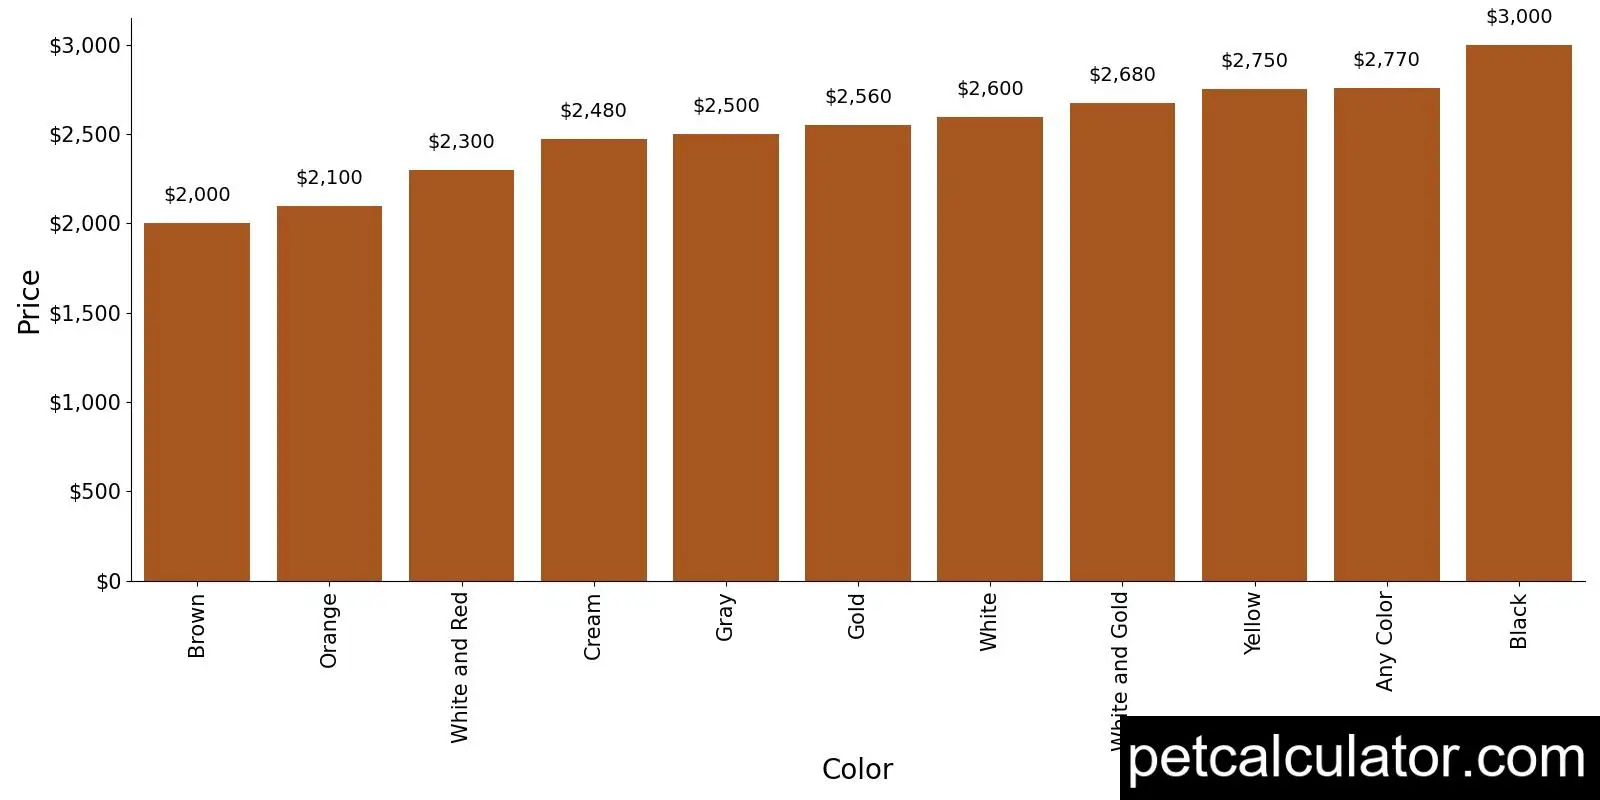 Price of English Golden Retrievers by Color 